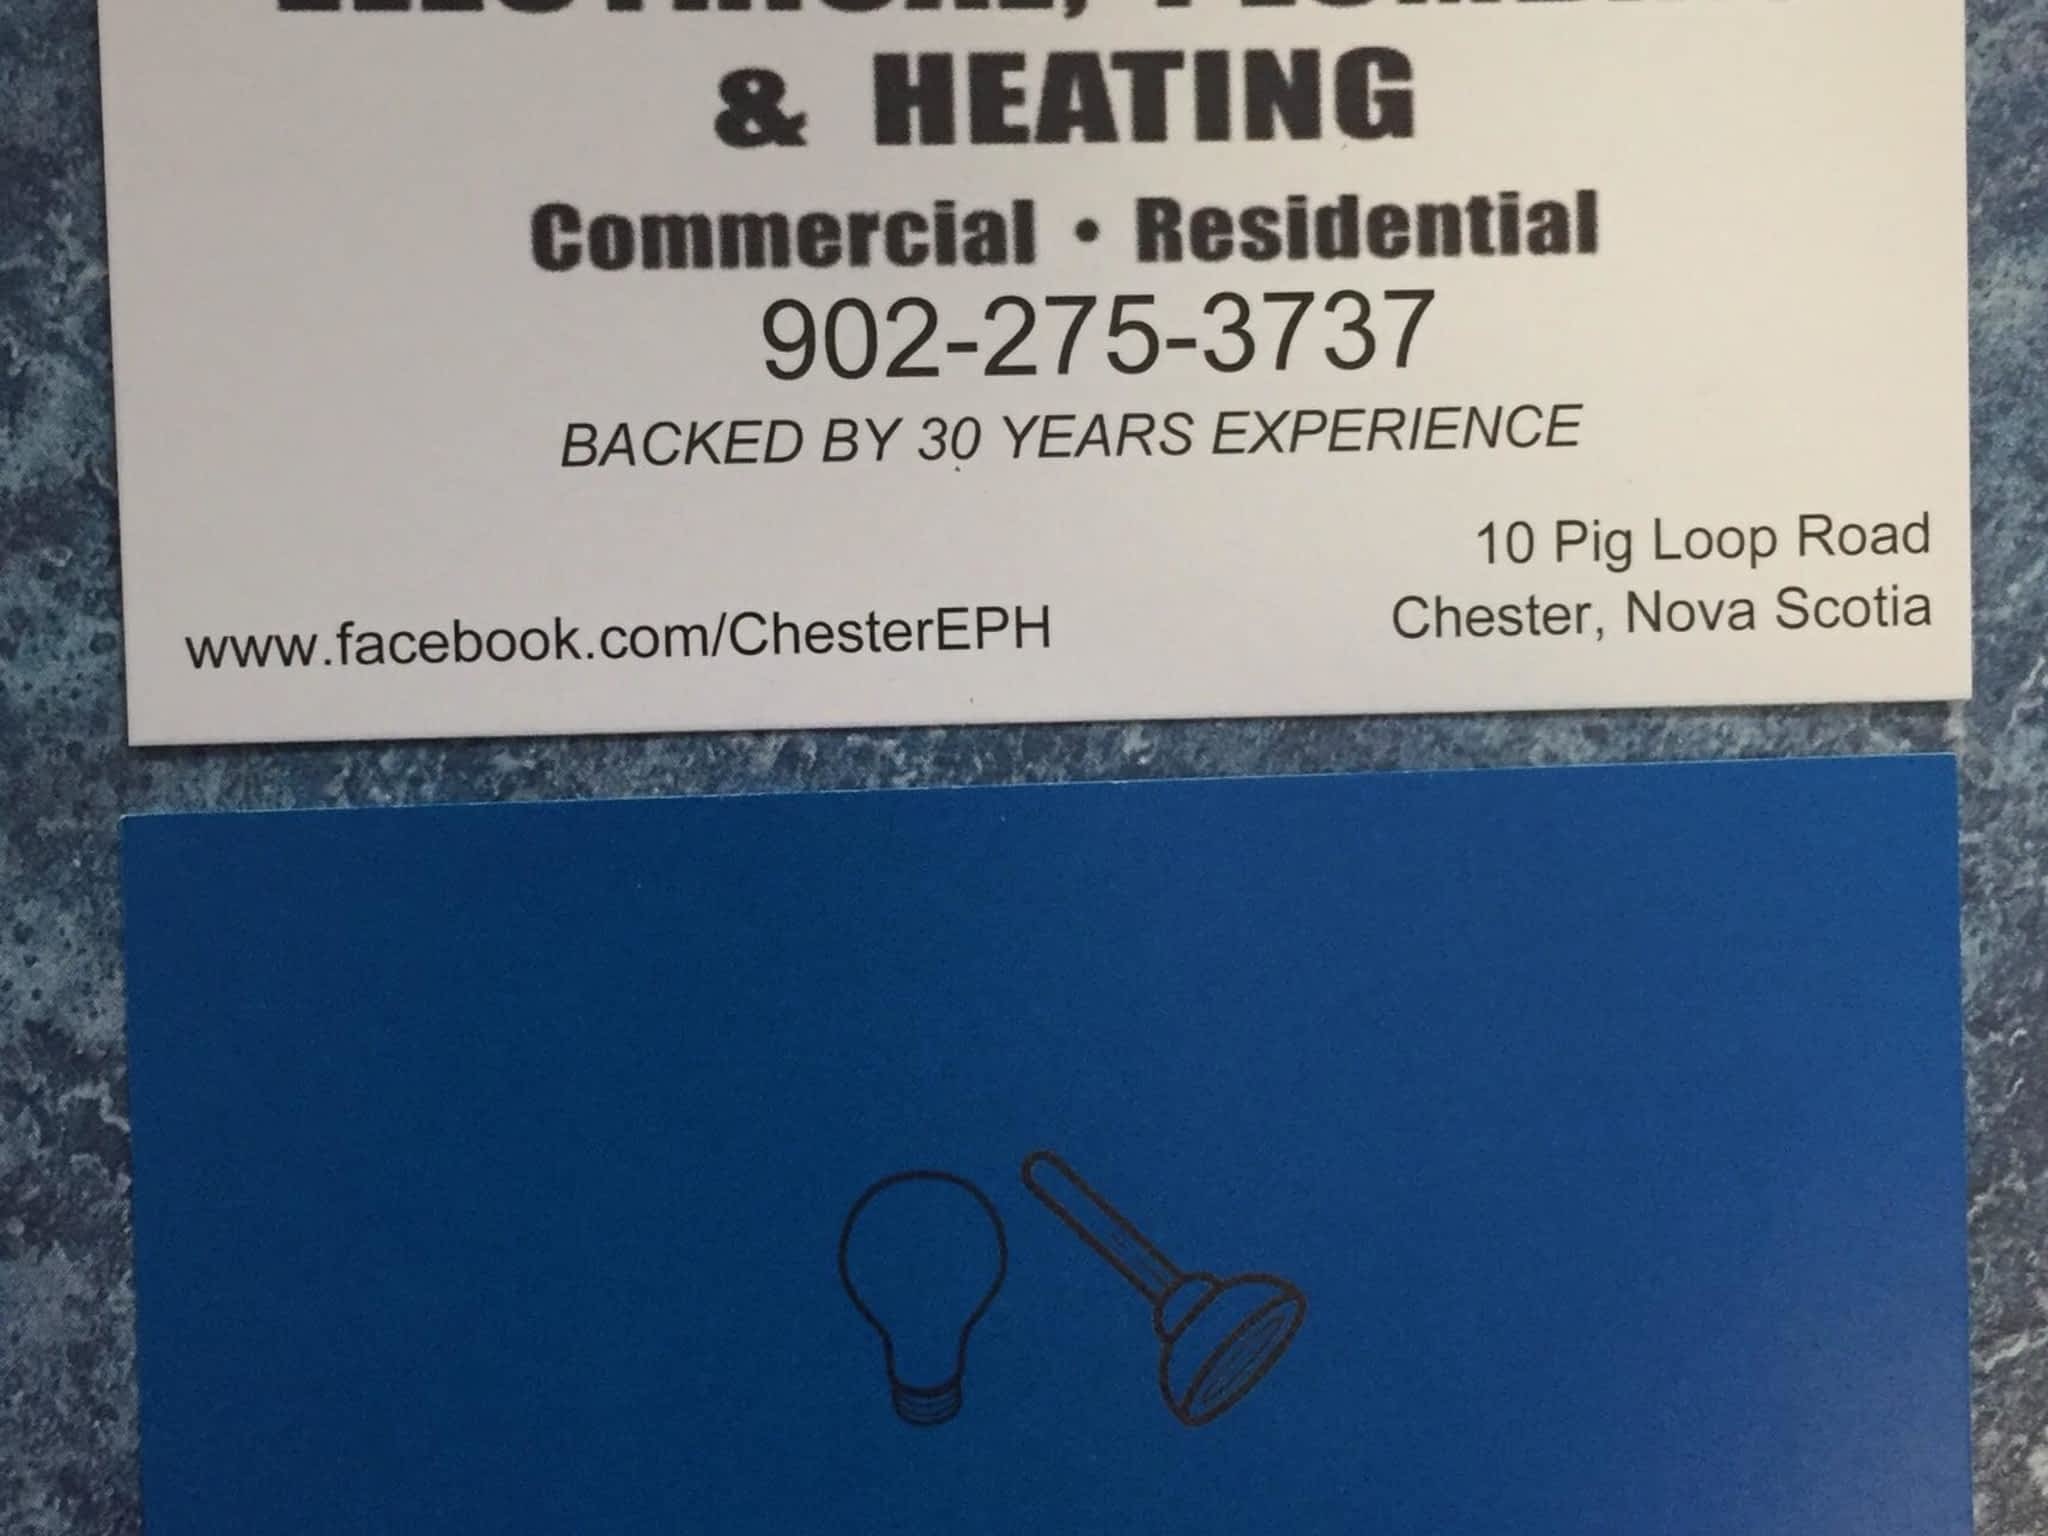 photo Chester Electrical Plumbing & Heating